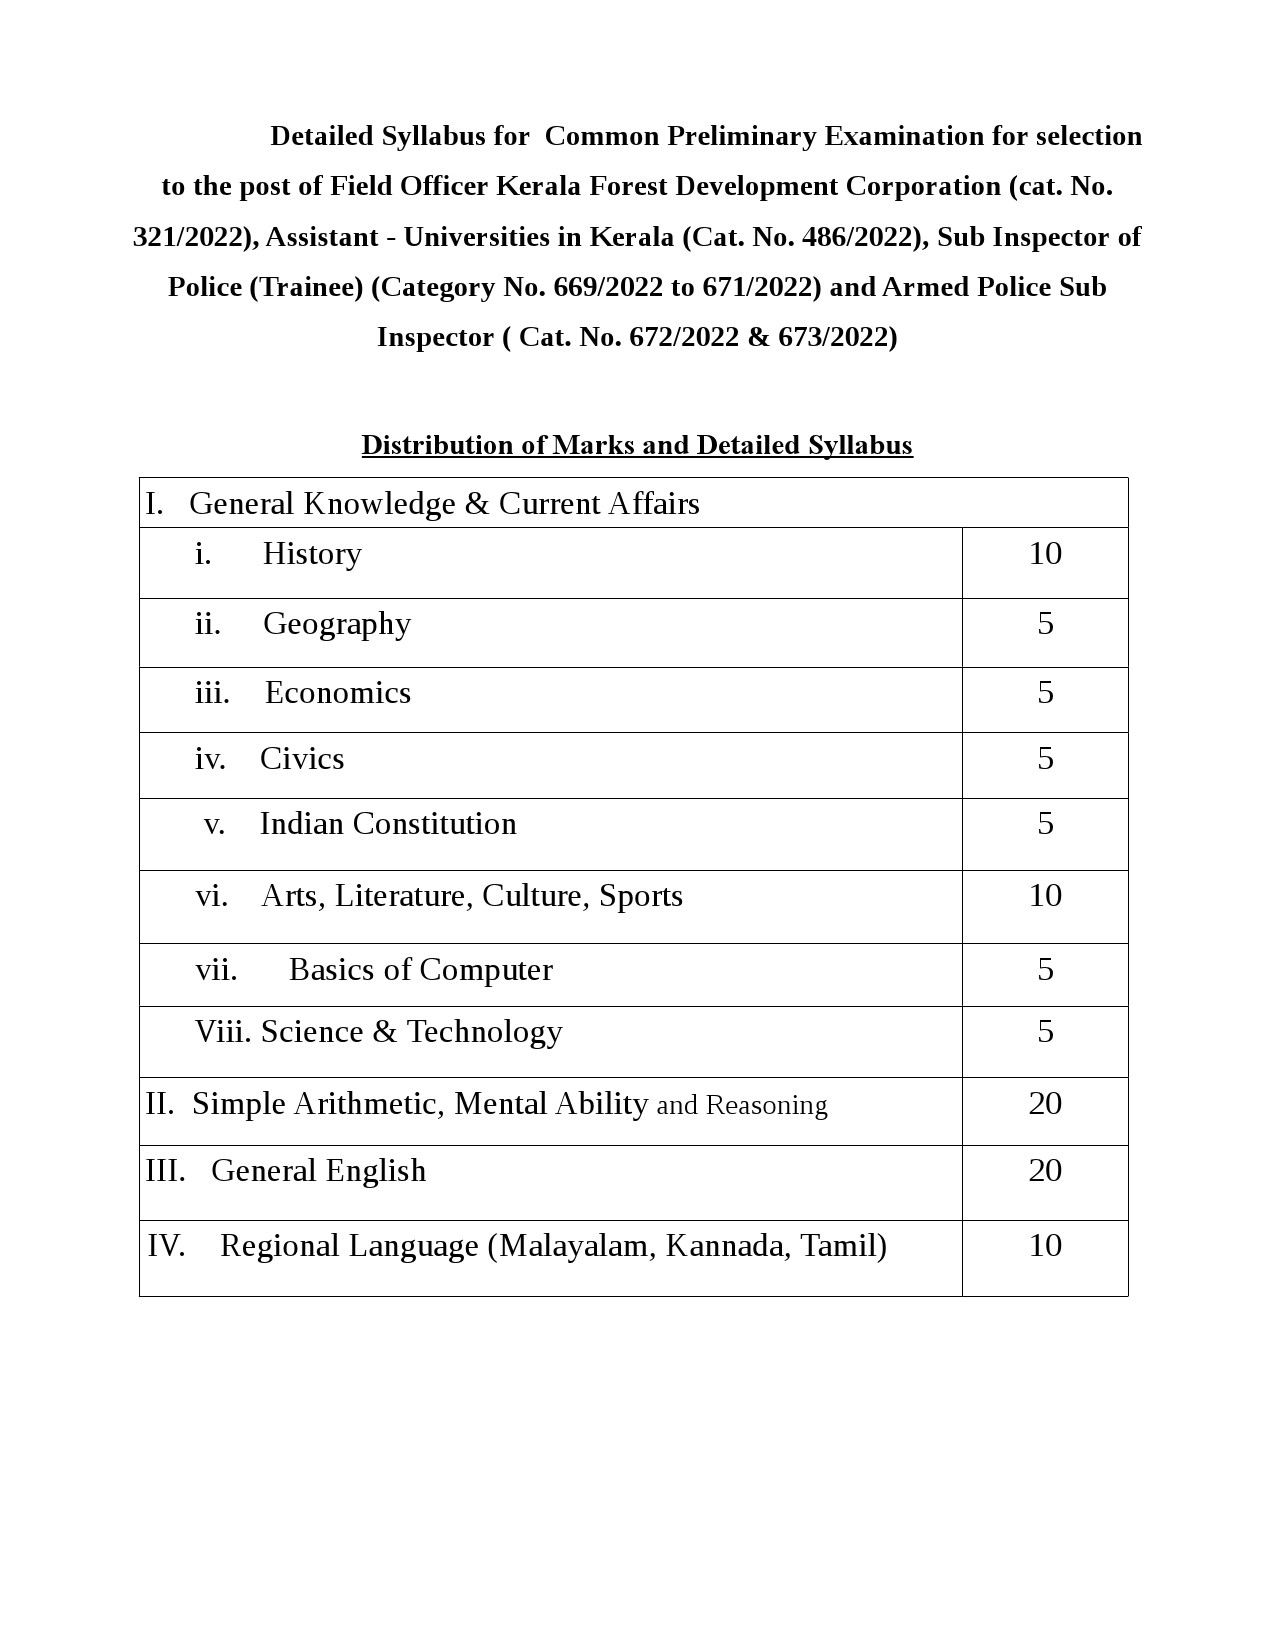 Detailed Syllabus for Common Preliminary Examination for Field Officer - Notification Image 1